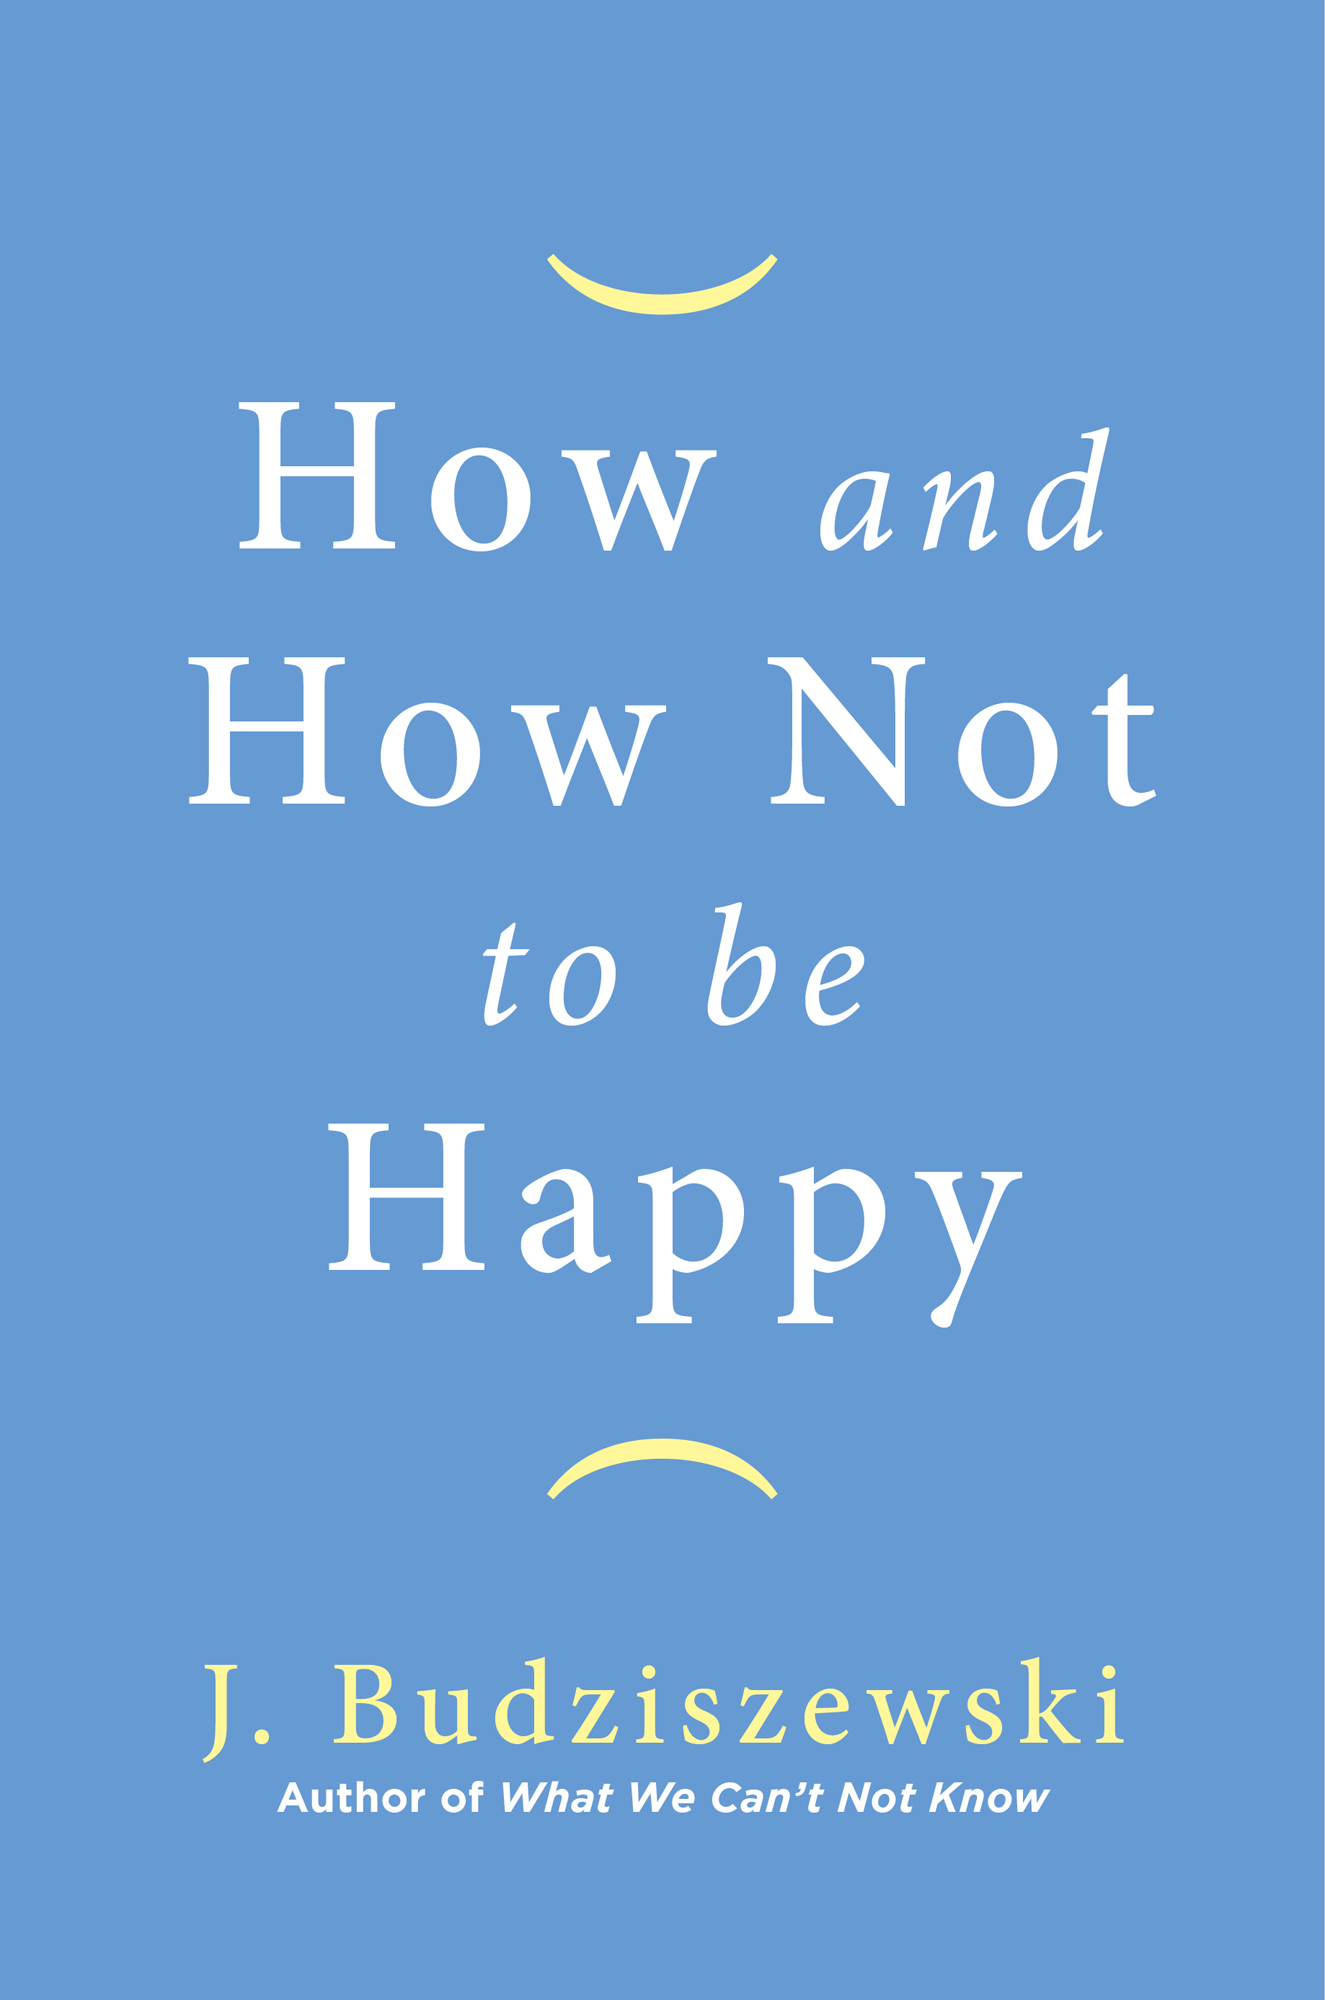 How and How Not to Be Happy J Budziszewski Author of What We Cant Not Know - photo 1